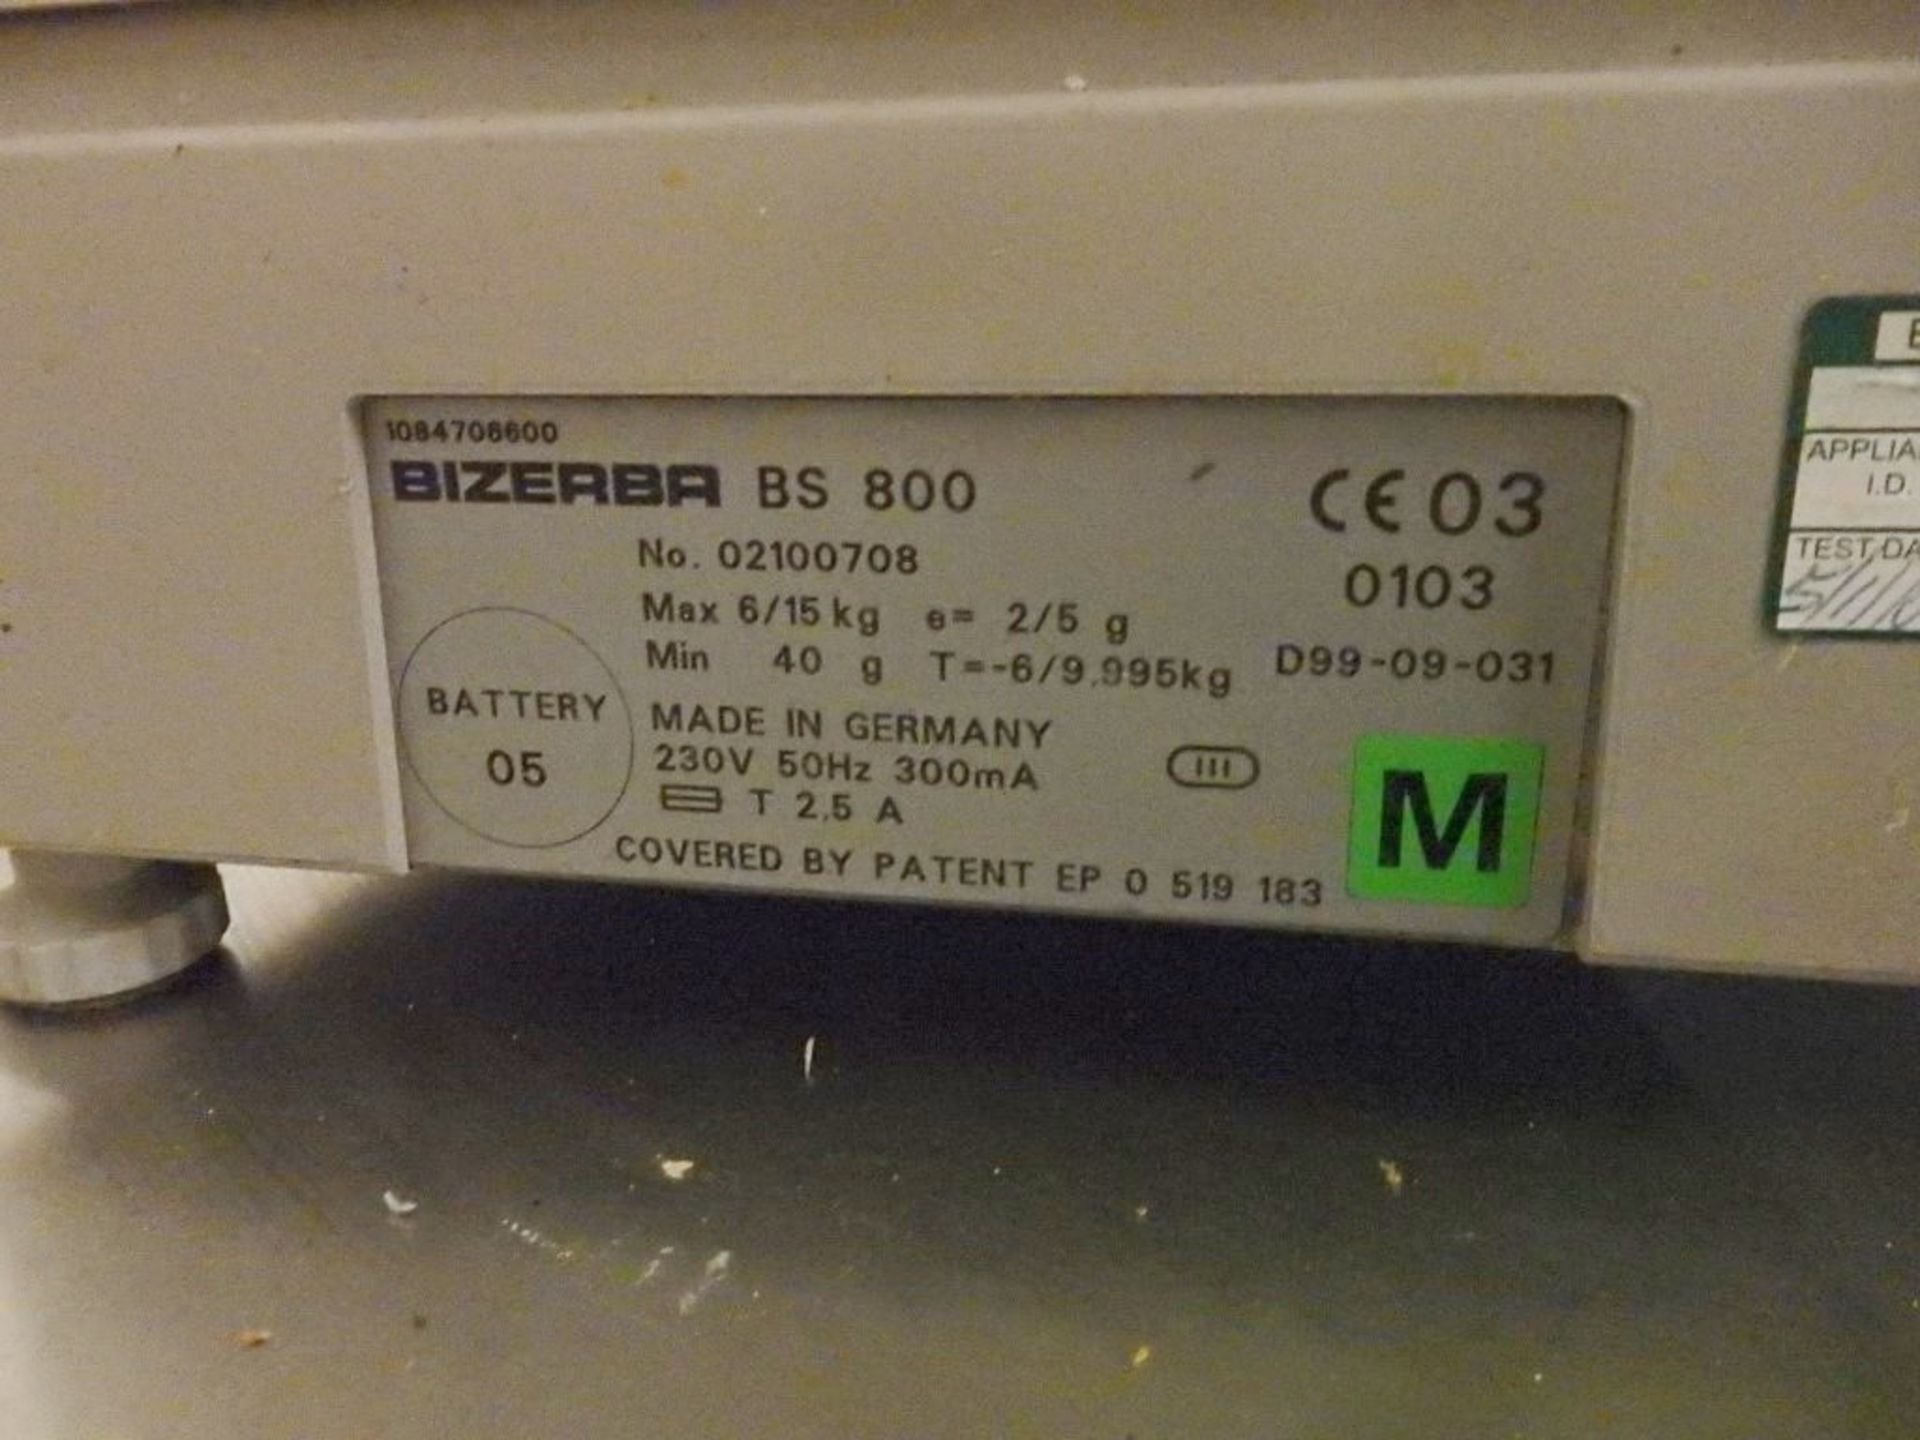 1 x Bizerba Butchers Scale And Printer - Dimensions: W36 x H54 x D44 - Ref: M072 - CL124 - Location: - Image 2 of 6